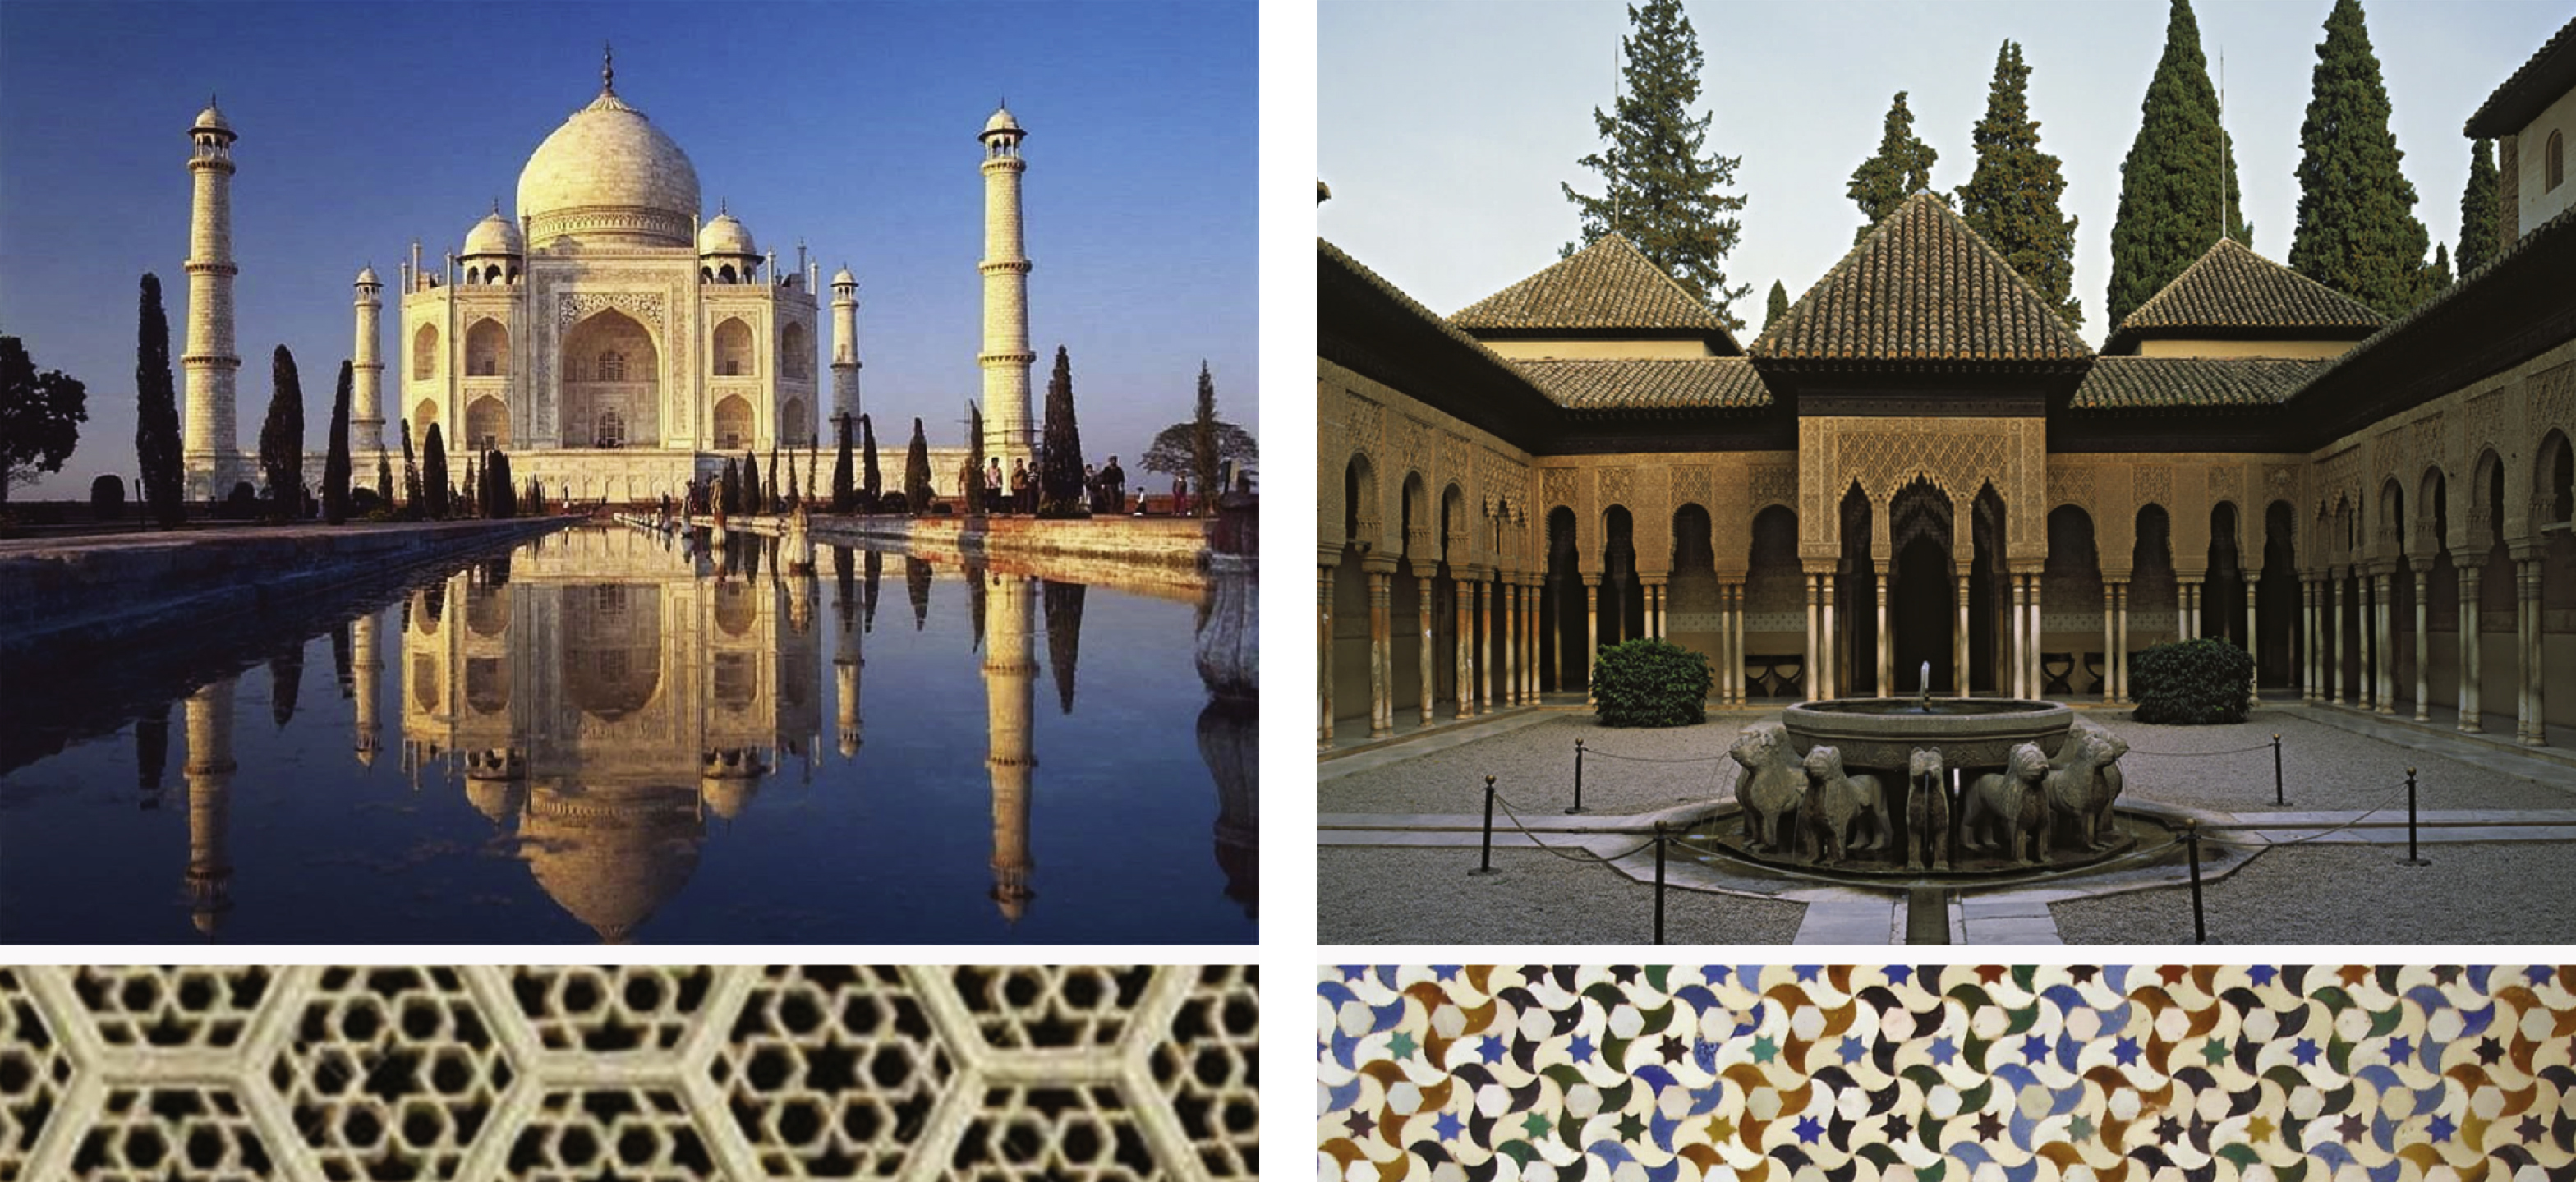 Taj Mahal (left) and Al-Hambra Palace (right) are iconic examples of a universal geometric approach to design.